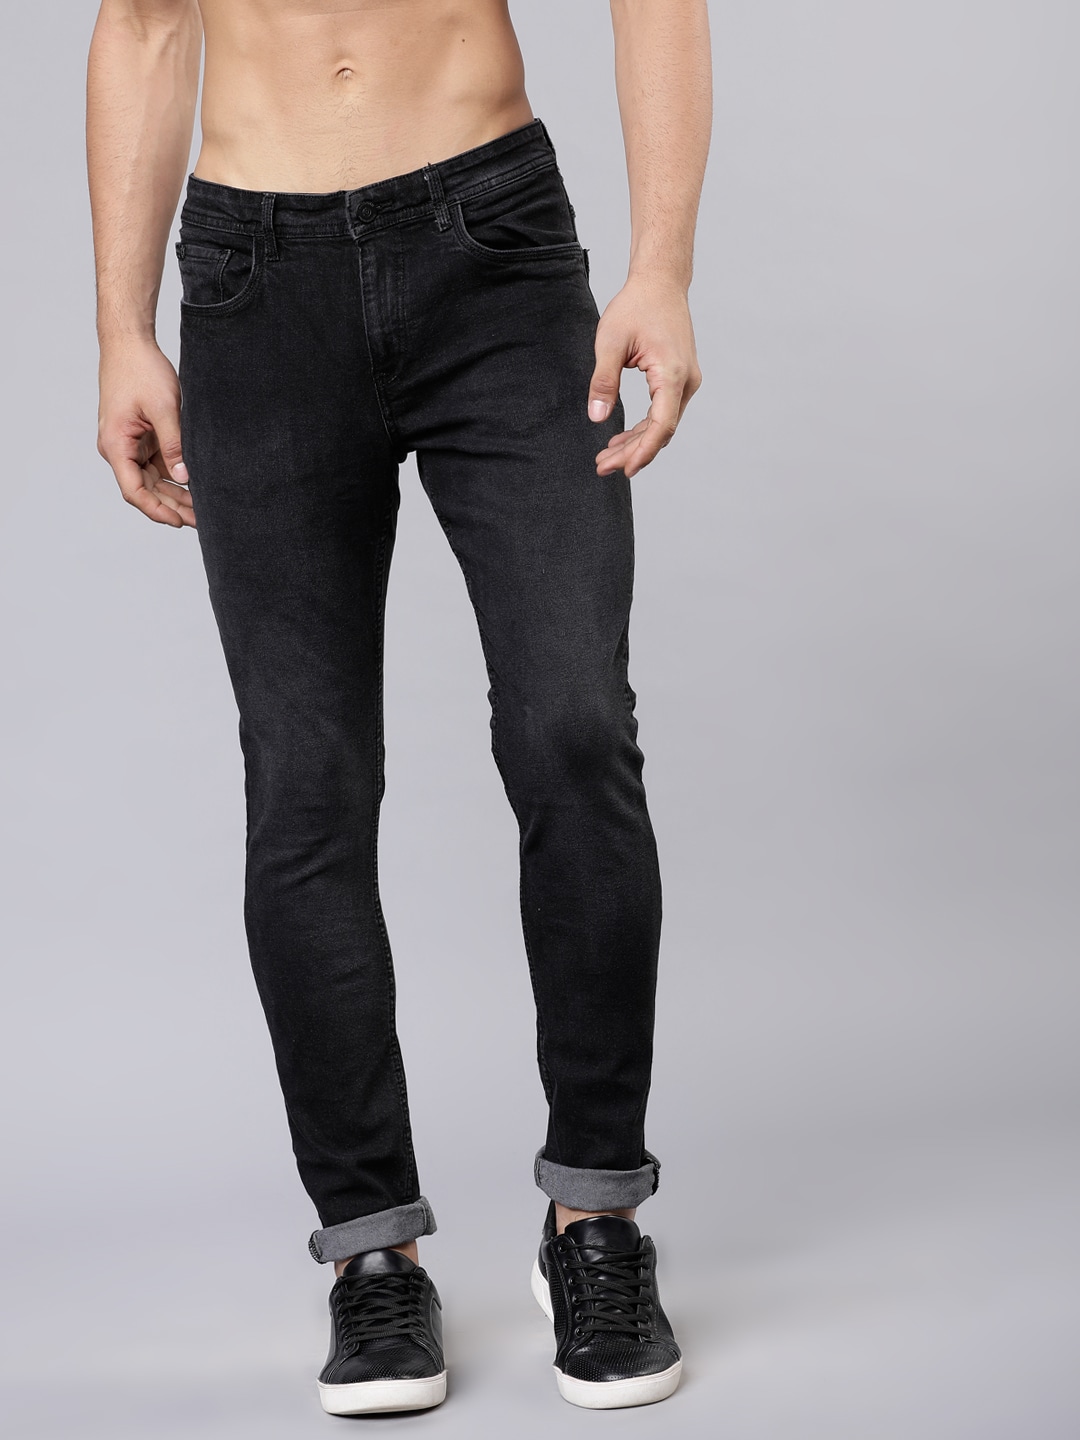 For 749/-(70% Off) Branded Men's Jeans Flat 70% To 80% Off (Locomotive, Jack and Jones, Red tape & many More) at Myntra